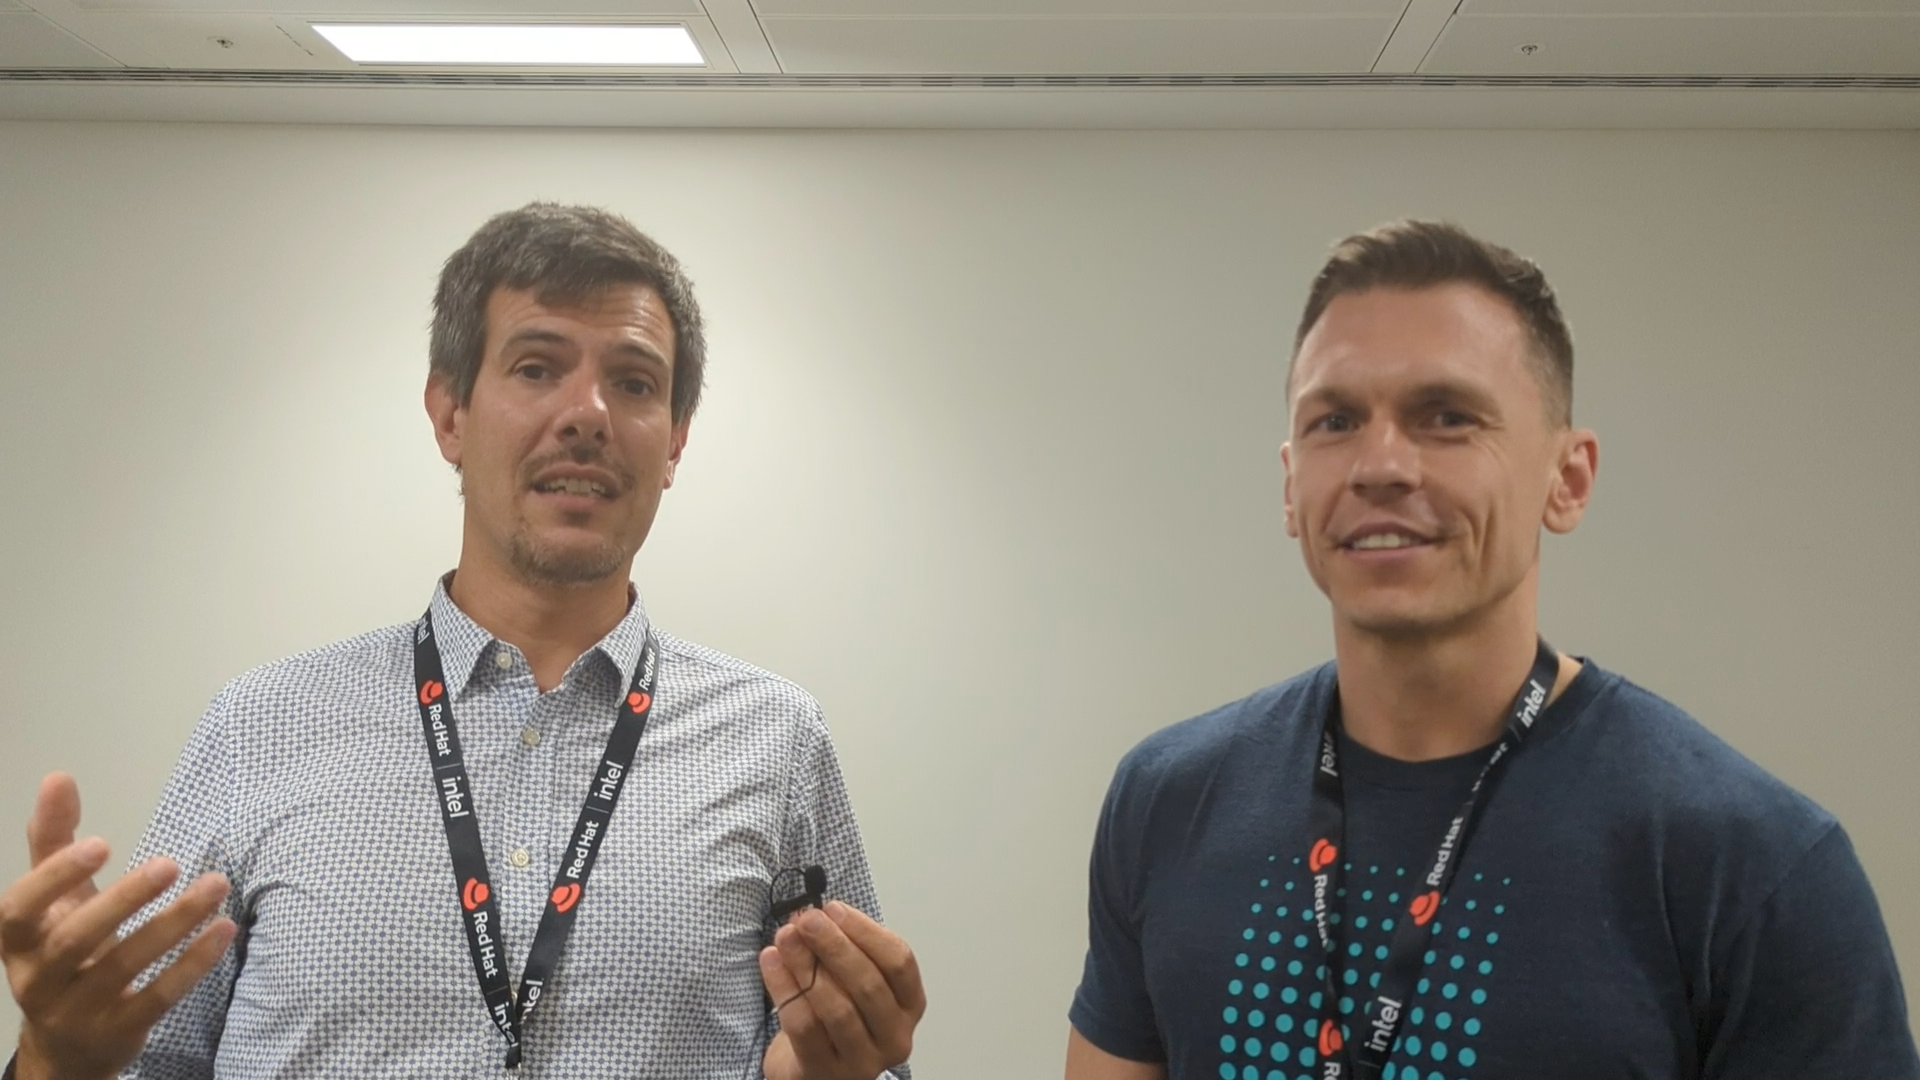 Meeting Craig Brandt Principal Technical Marketing Manager at Ansible by Red Hat